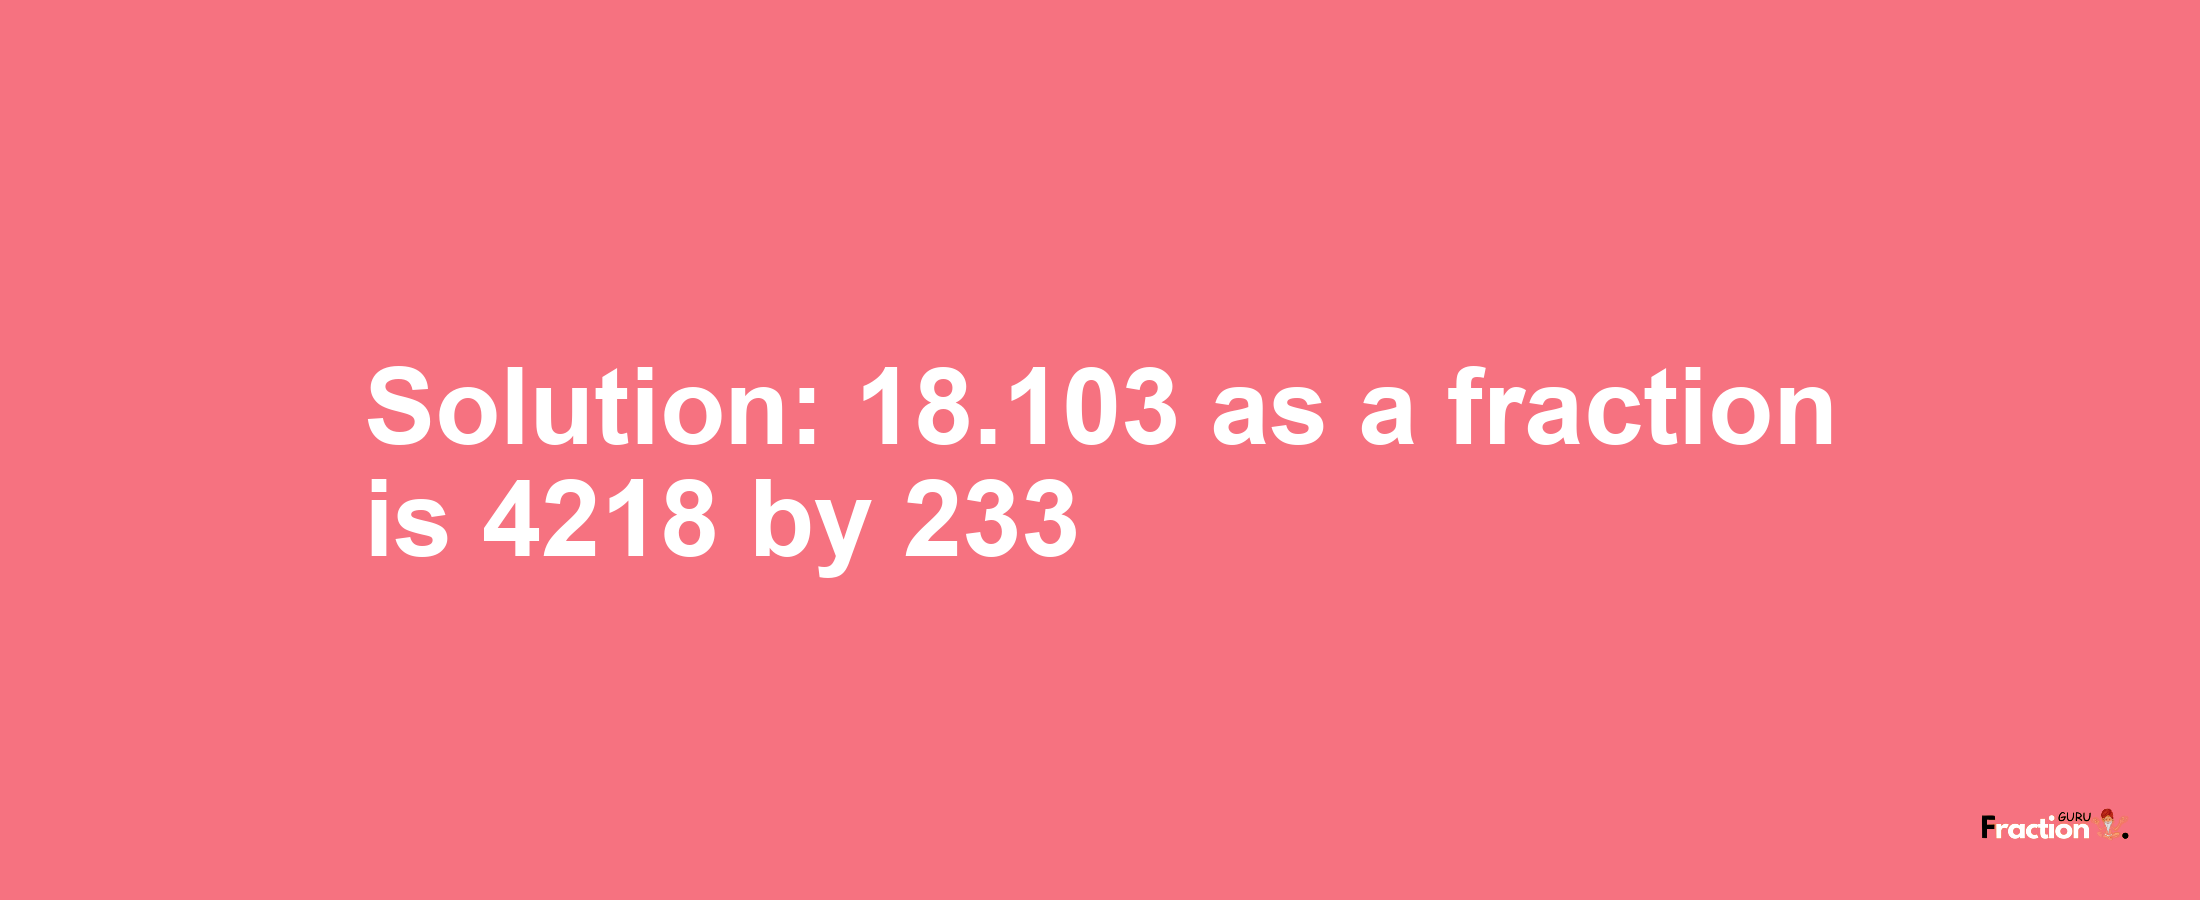 Solution:18.103 as a fraction is 4218/233